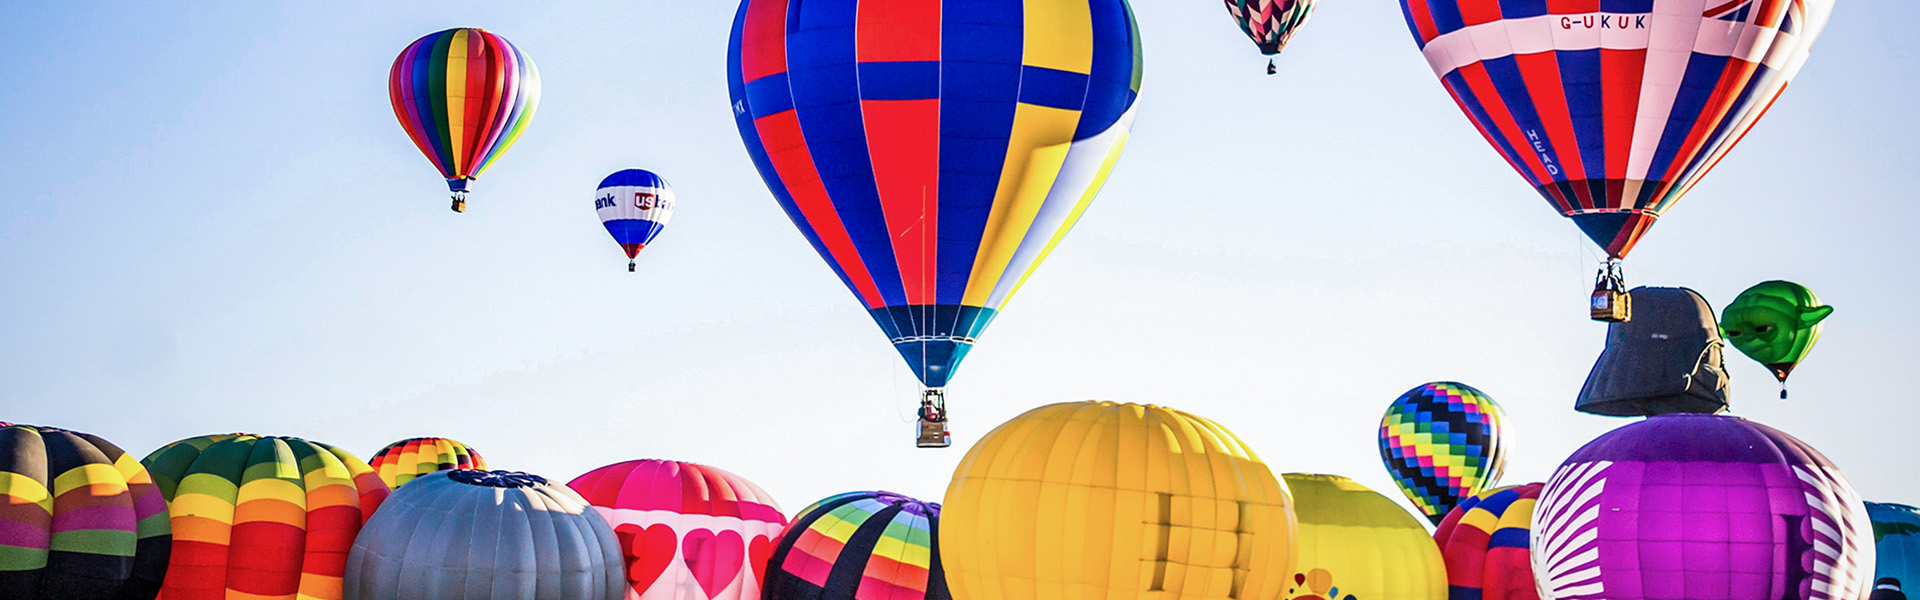 Colorful Hot Air Balloons in a blue sky